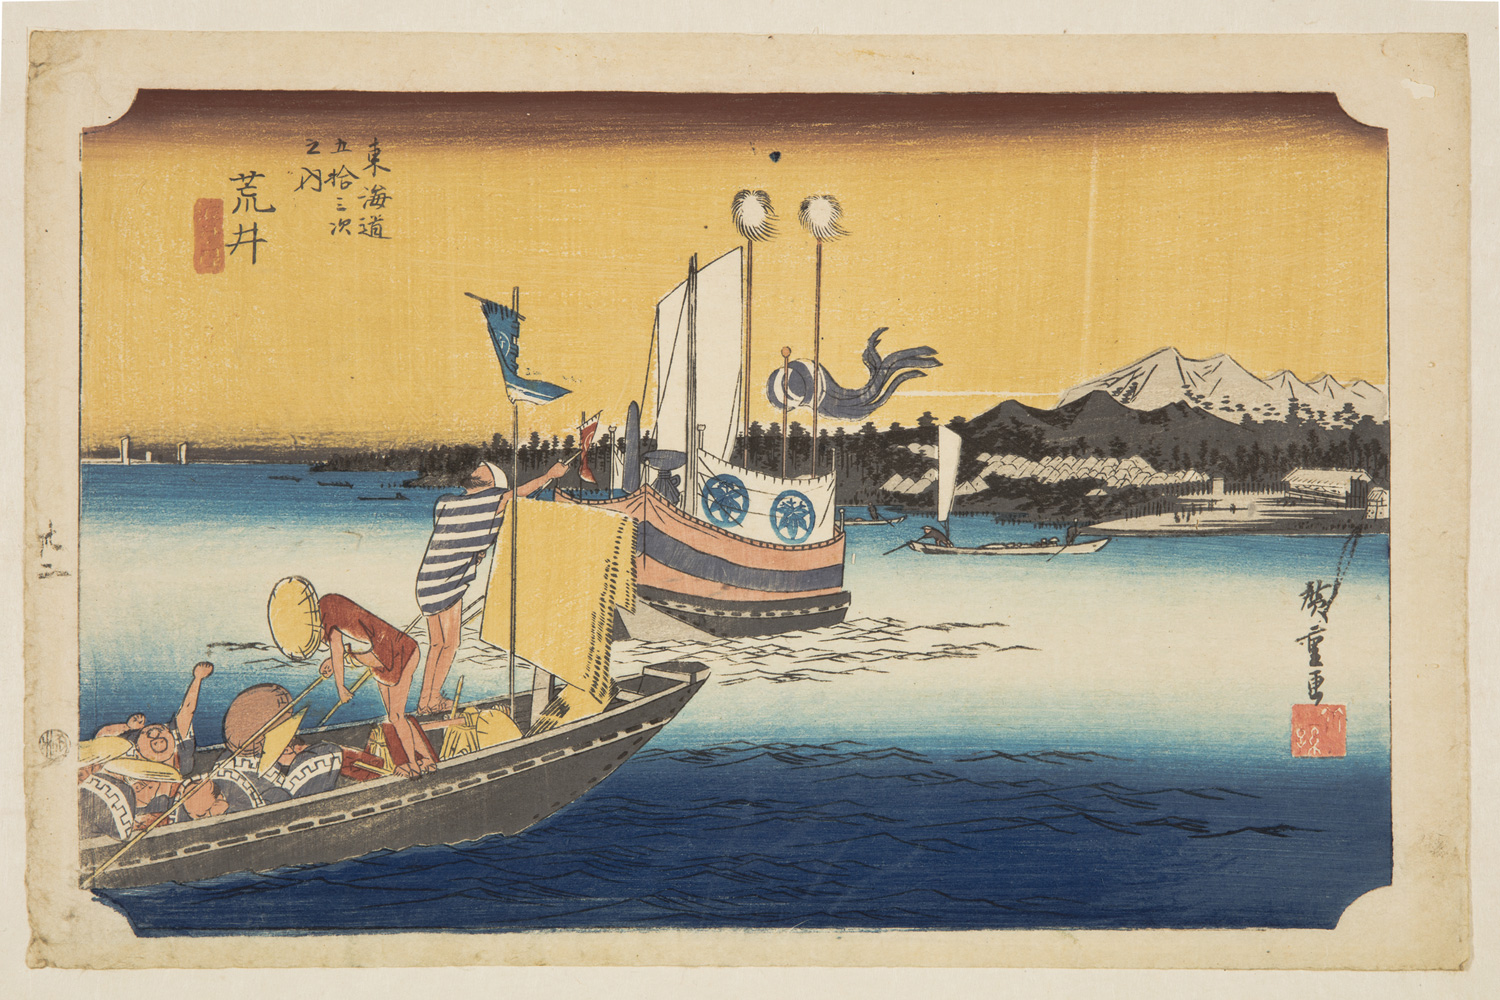 A Japanese print of boats on the water. The boat in the foreground is full of passengers, two men standing push the boat along with poles. The shoreline can be seen in the background, village, woods and mountains.